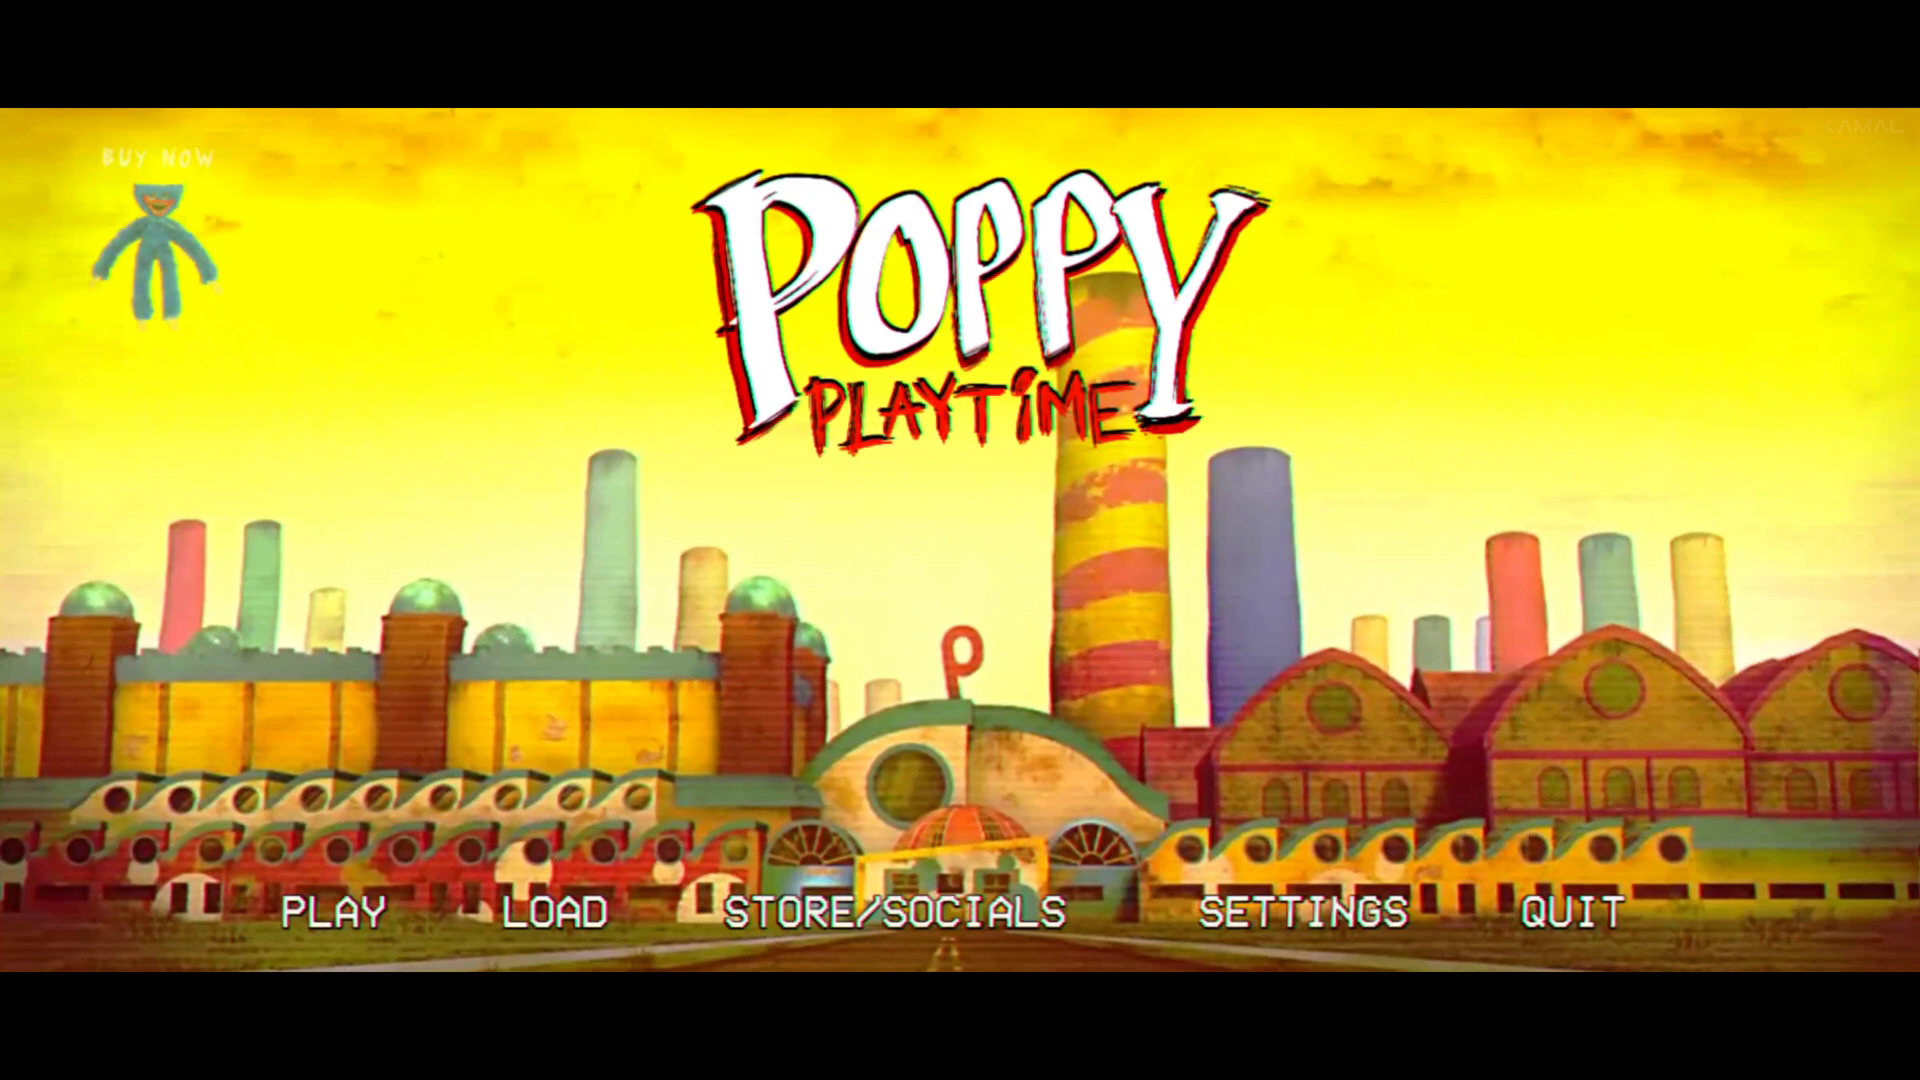 poppy playtime chapter 2 is now out on IOS & Android. : r/PoppyPlaytime